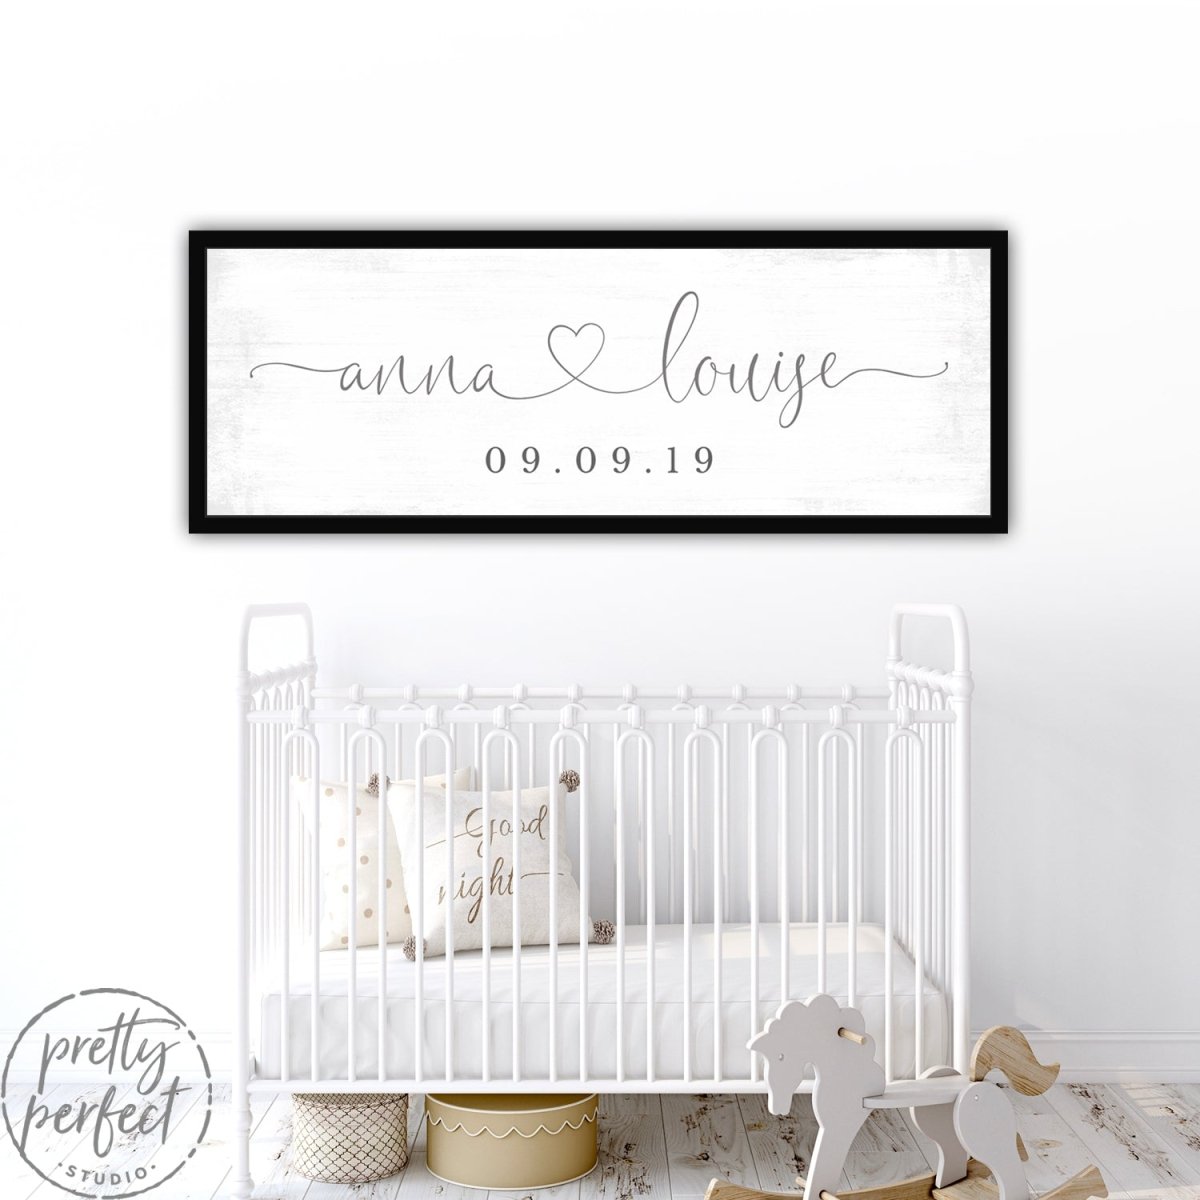 Boy or Girl Personalized Name Sign for the Nursery Room Above Crib - Pretty Perfect Studio